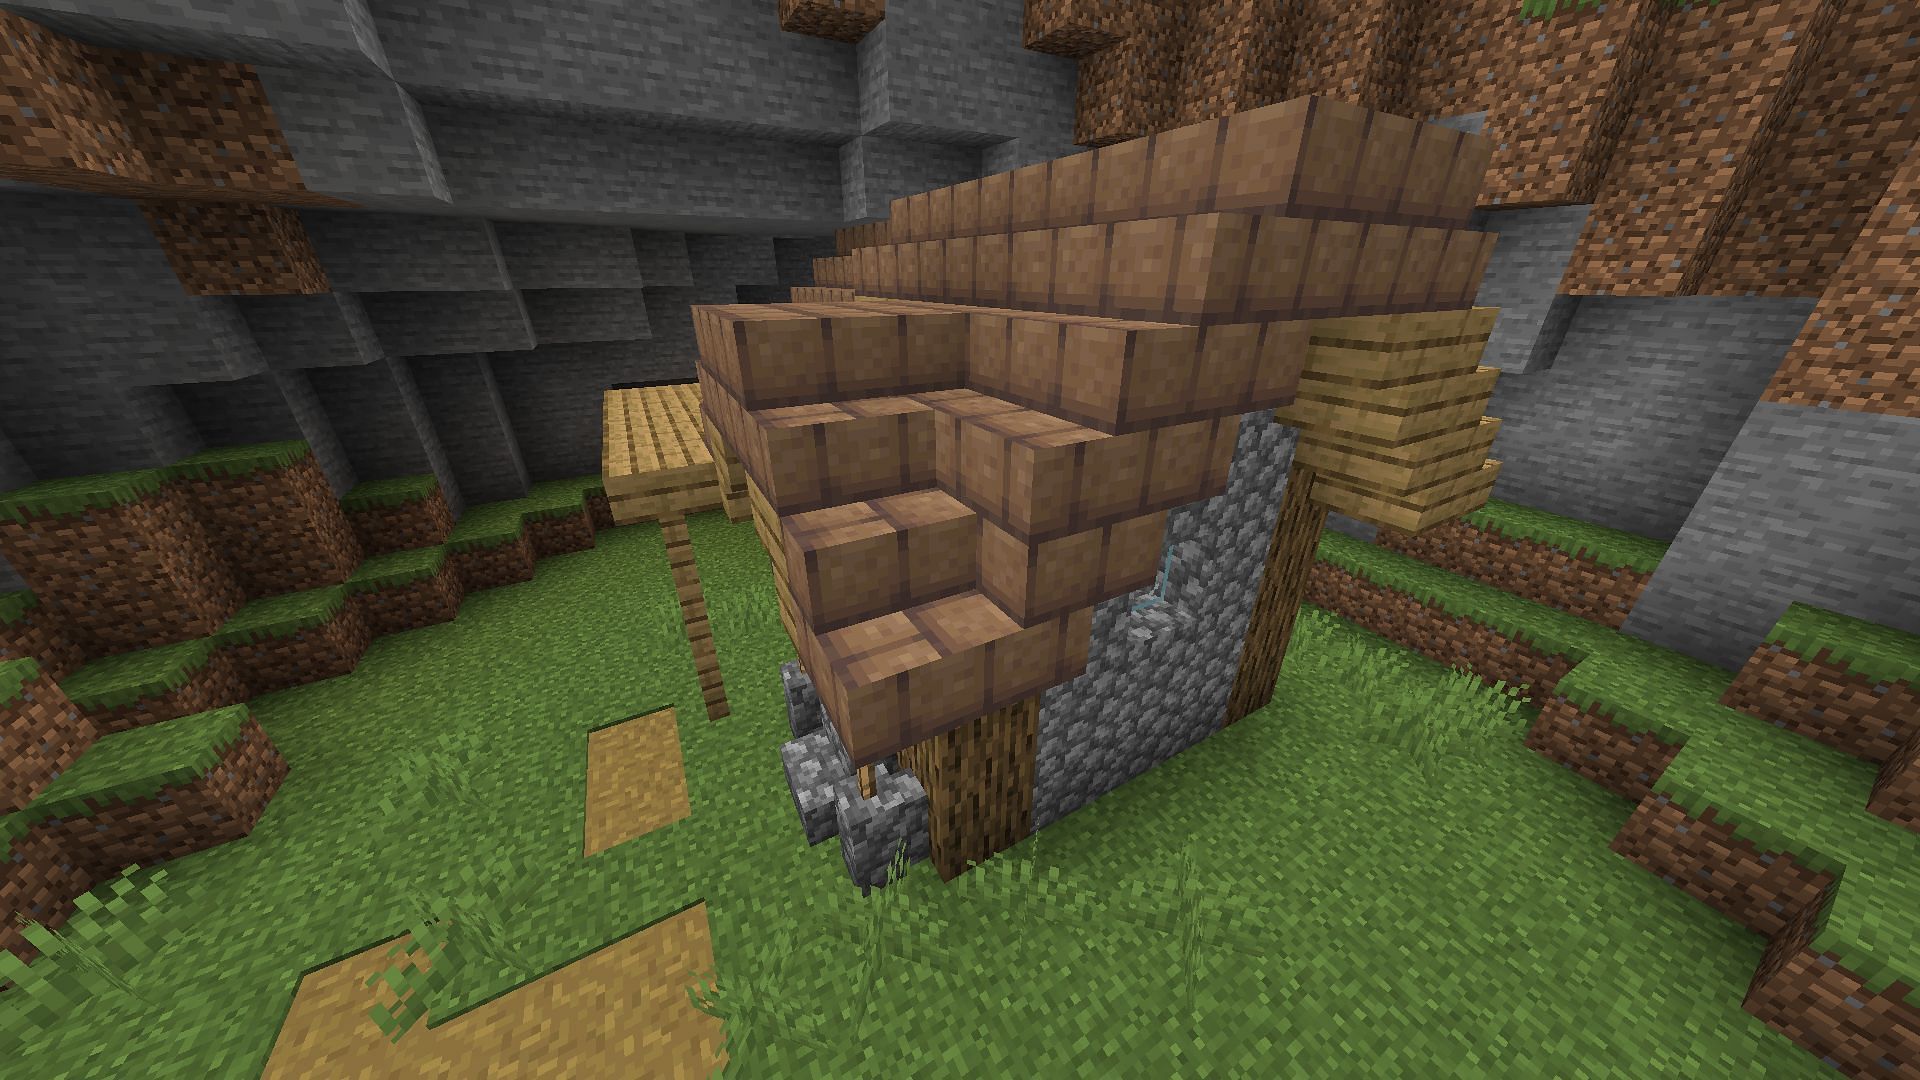 Mud brick roofs can protect builds from burning from lightning (Image via Minecraft 1.19 update)